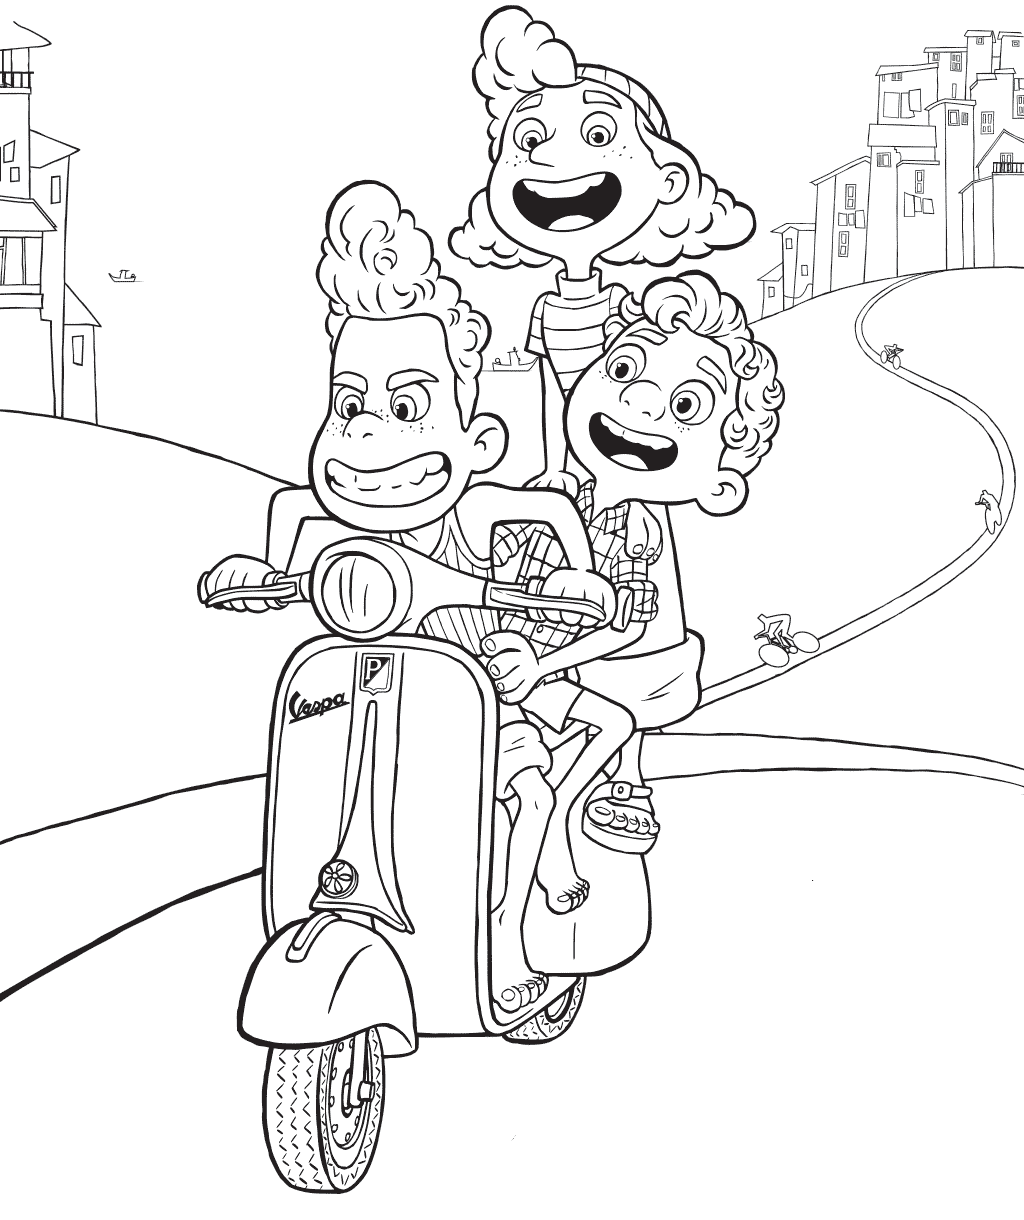 Disney Luca coloring pages